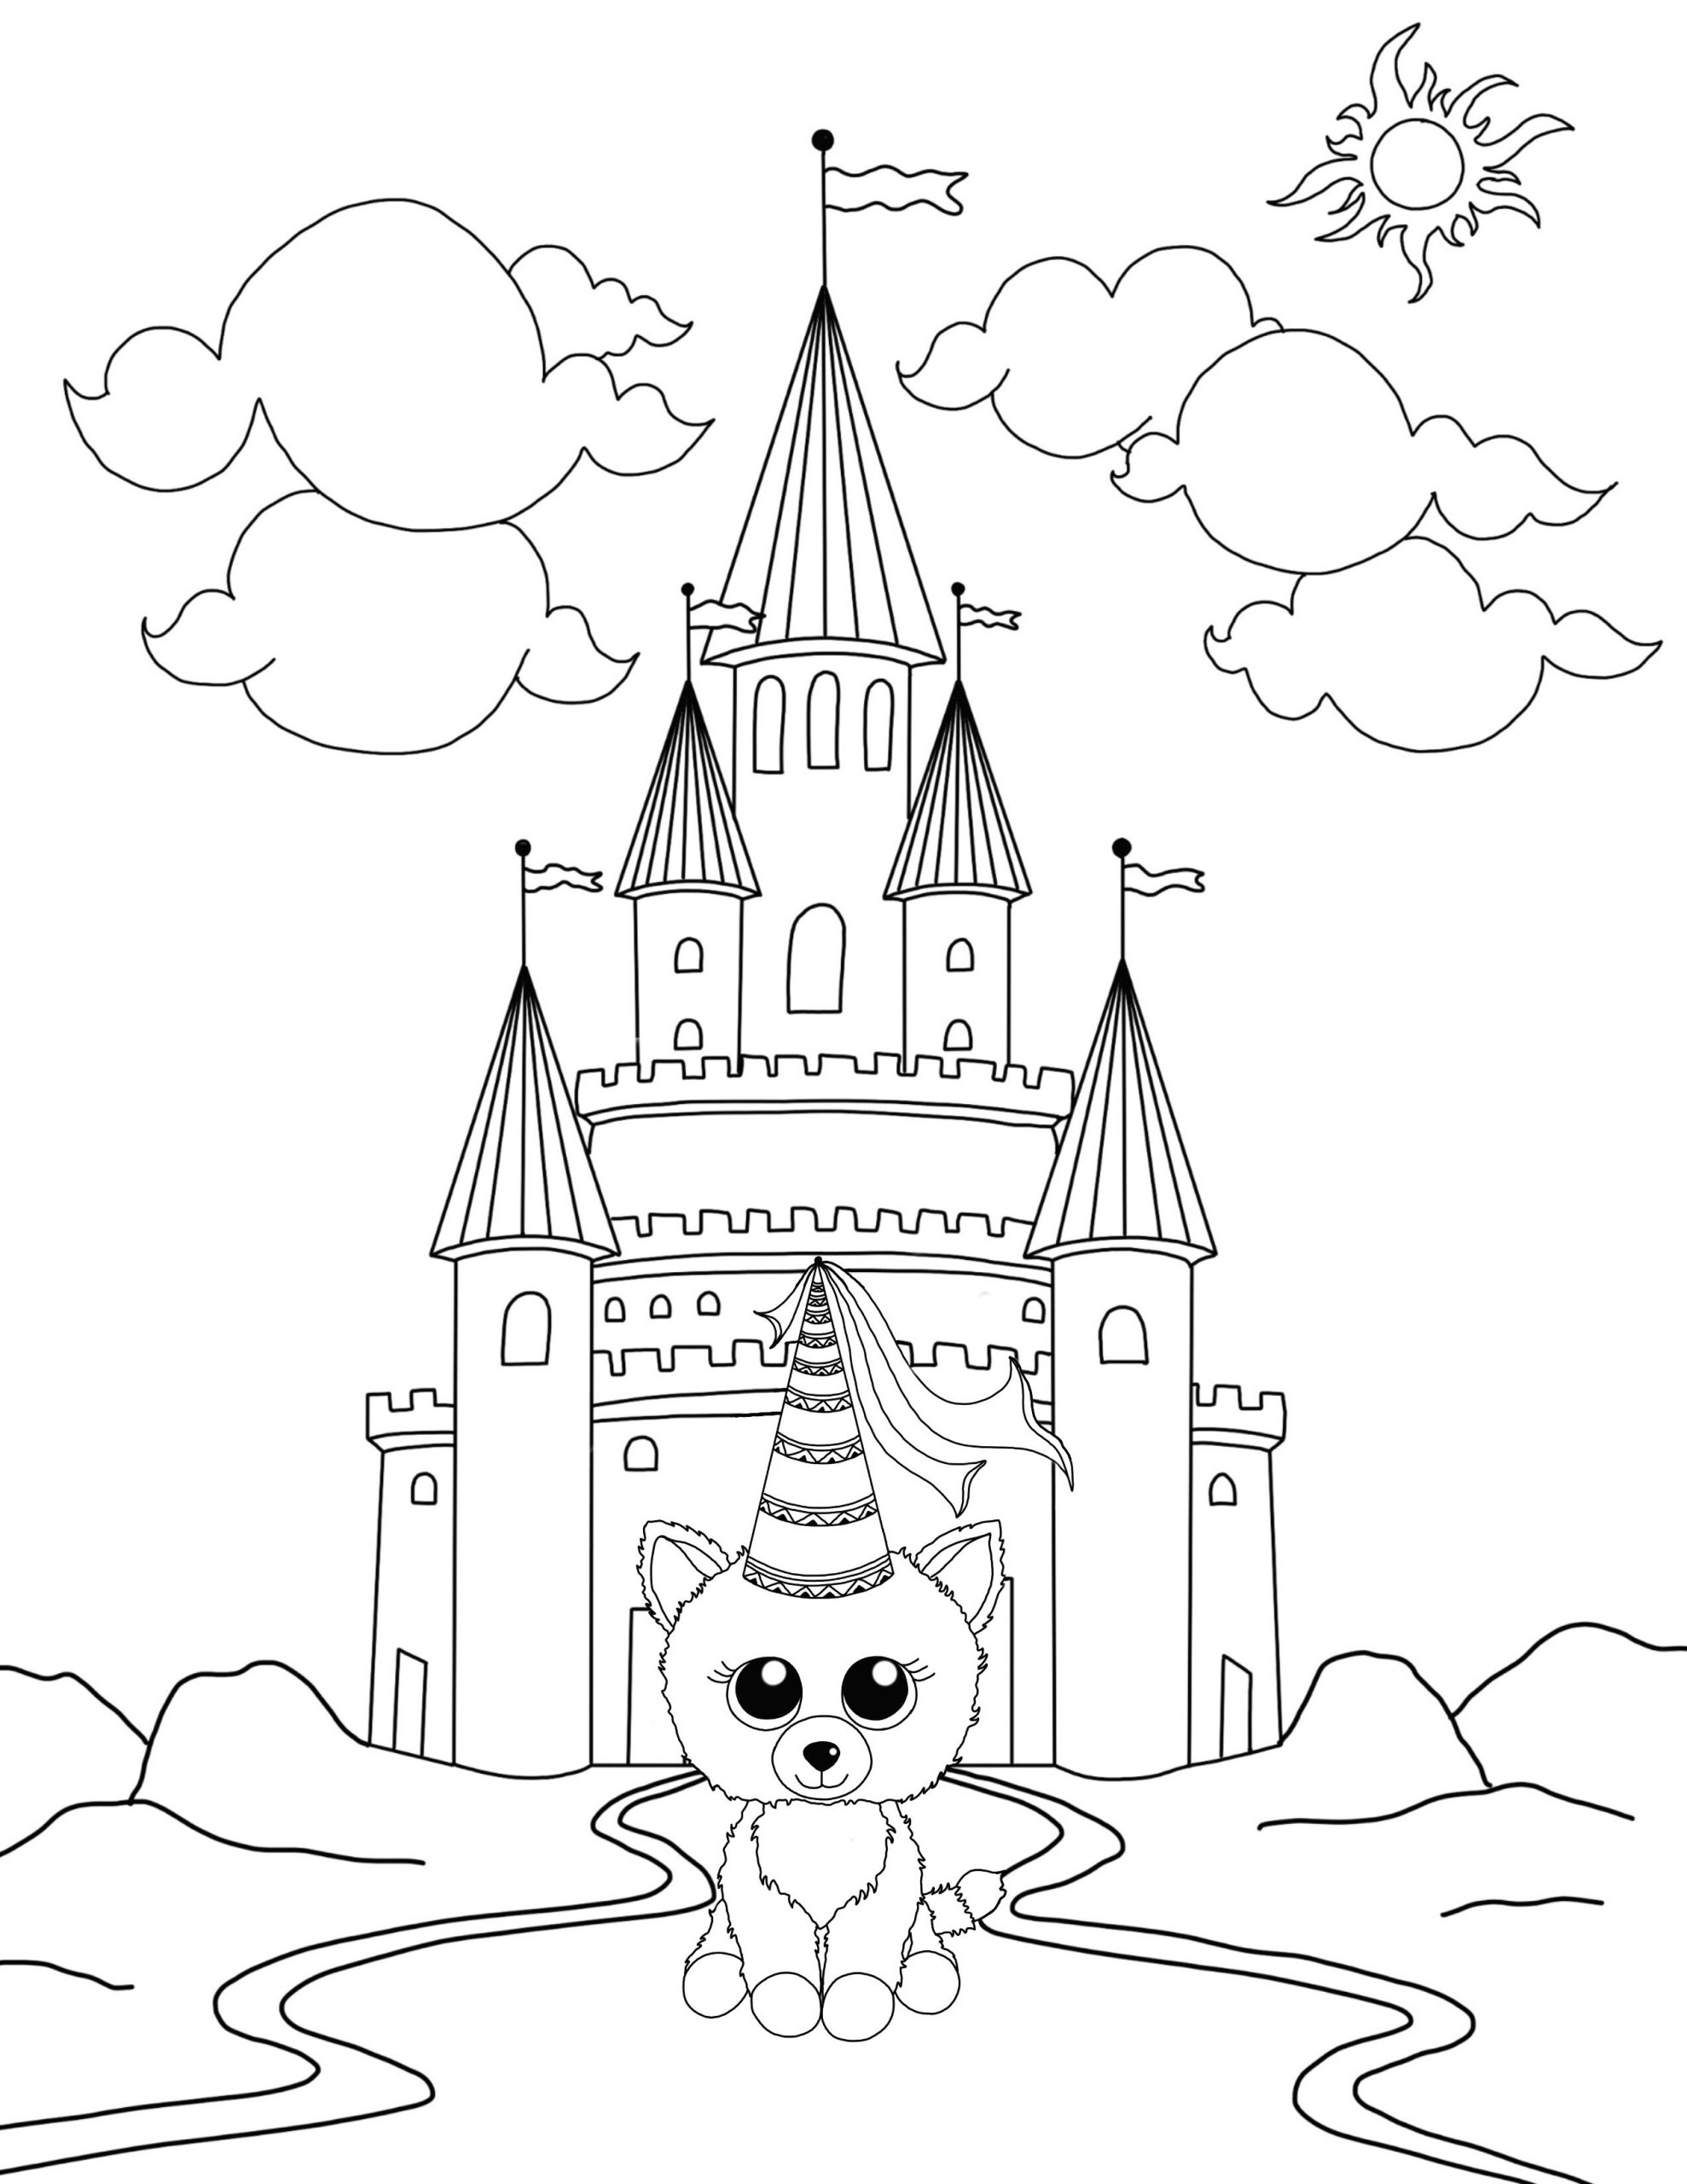 Beanie Boo Coloring Pages - Coloring Home